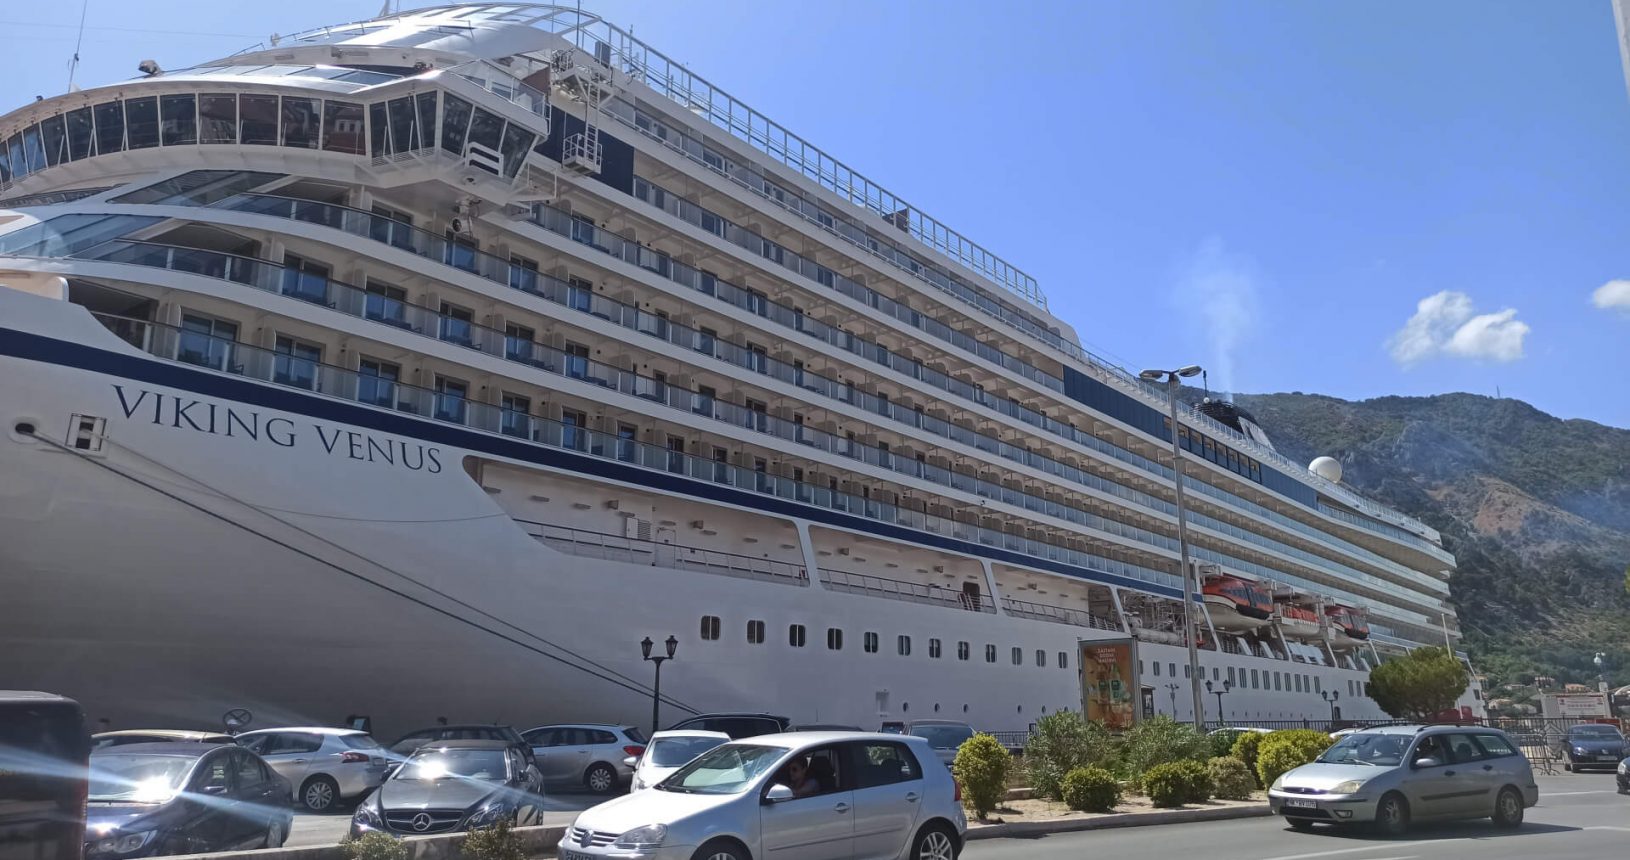 Huge cruise ship in the port of Kotor 1626535176762